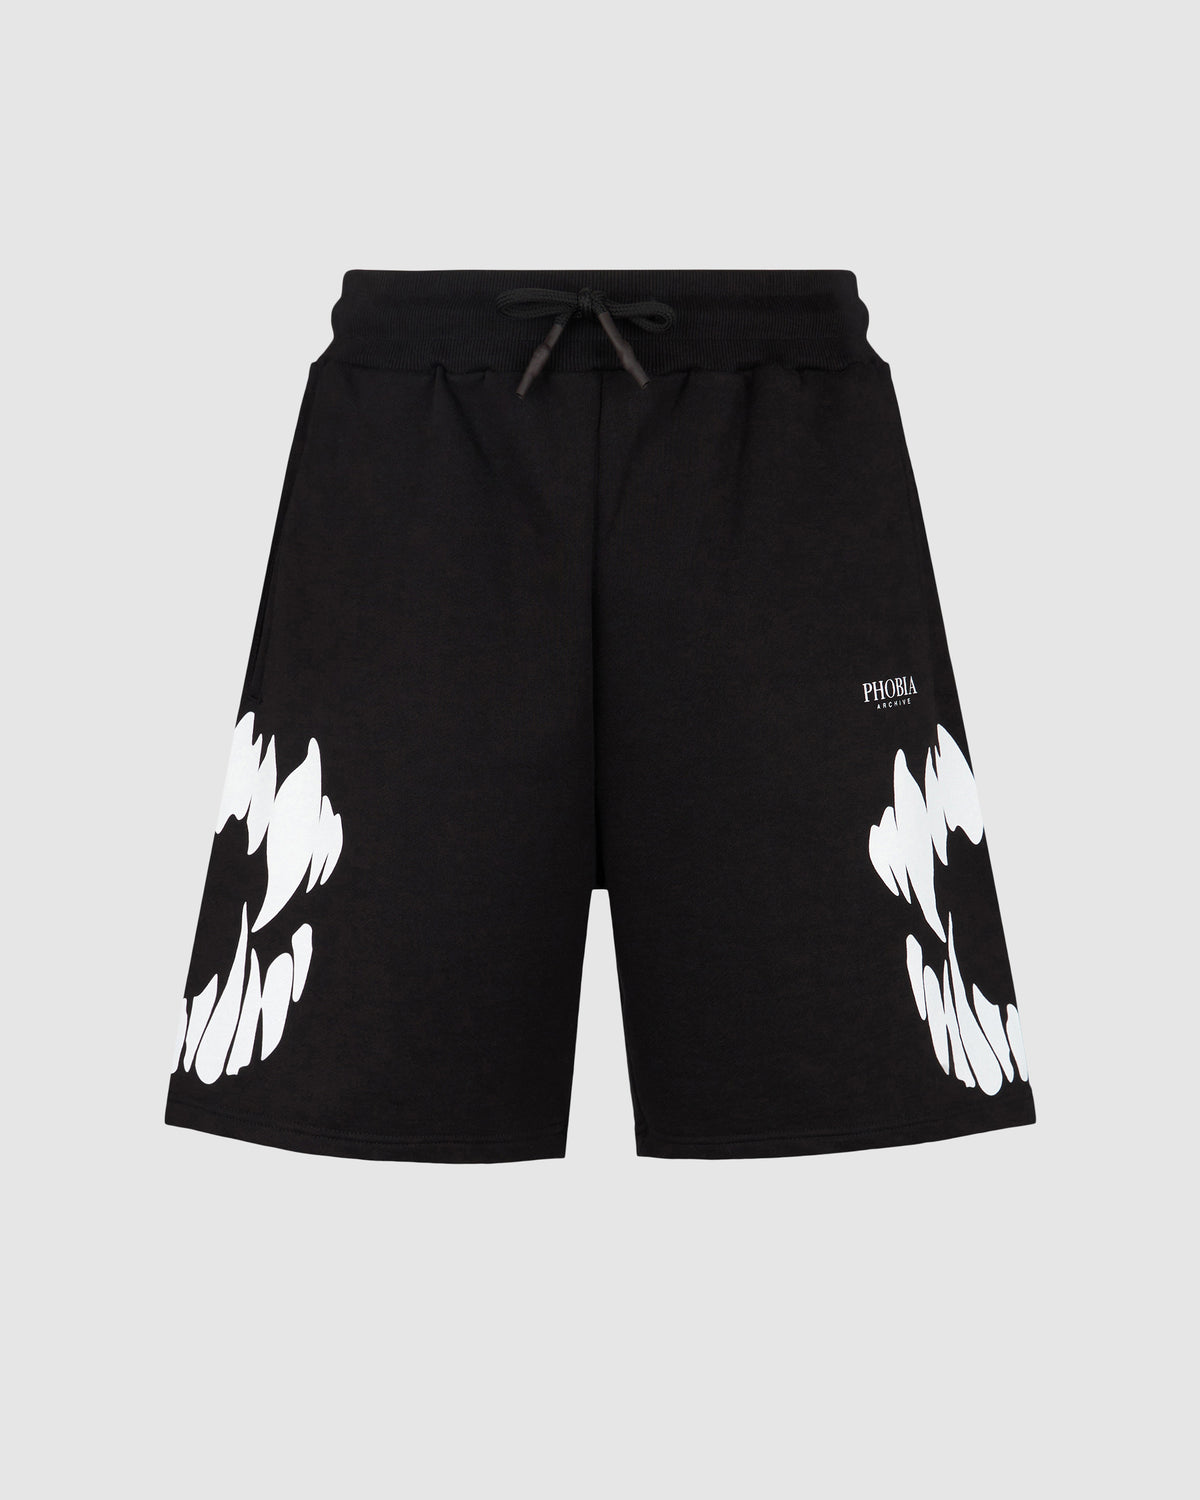 PHOBIA BLACK SHORTS WITH WHITE MOUTH PRINT